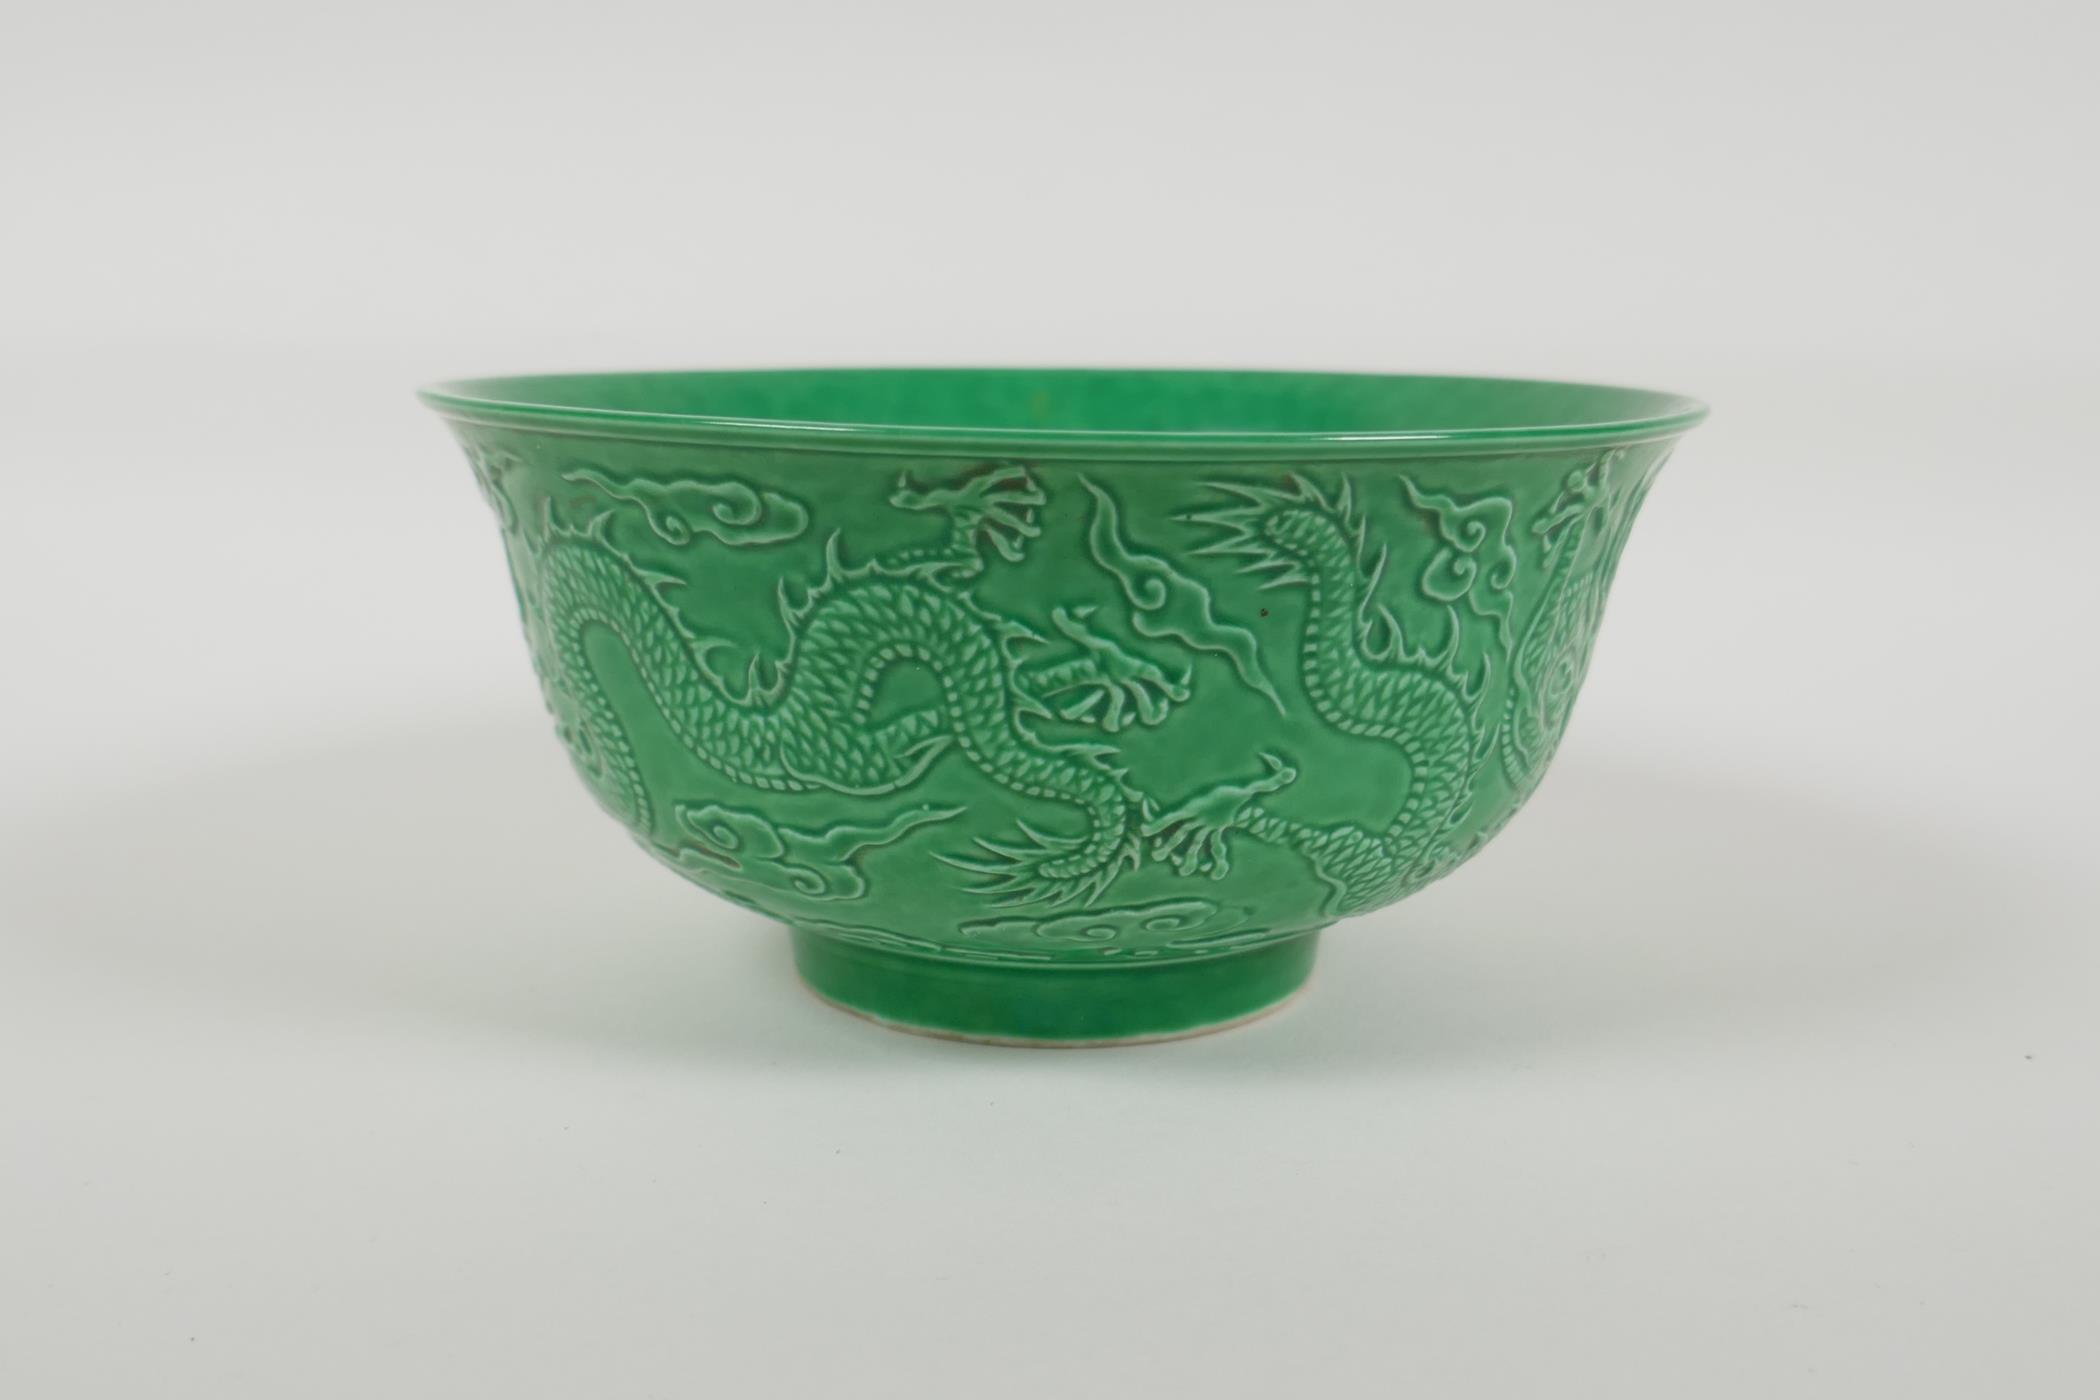 A green glazed porcelain rice bowl with raised dragon decoration, Chinese Yongzheng 6 character mark - Image 2 of 5